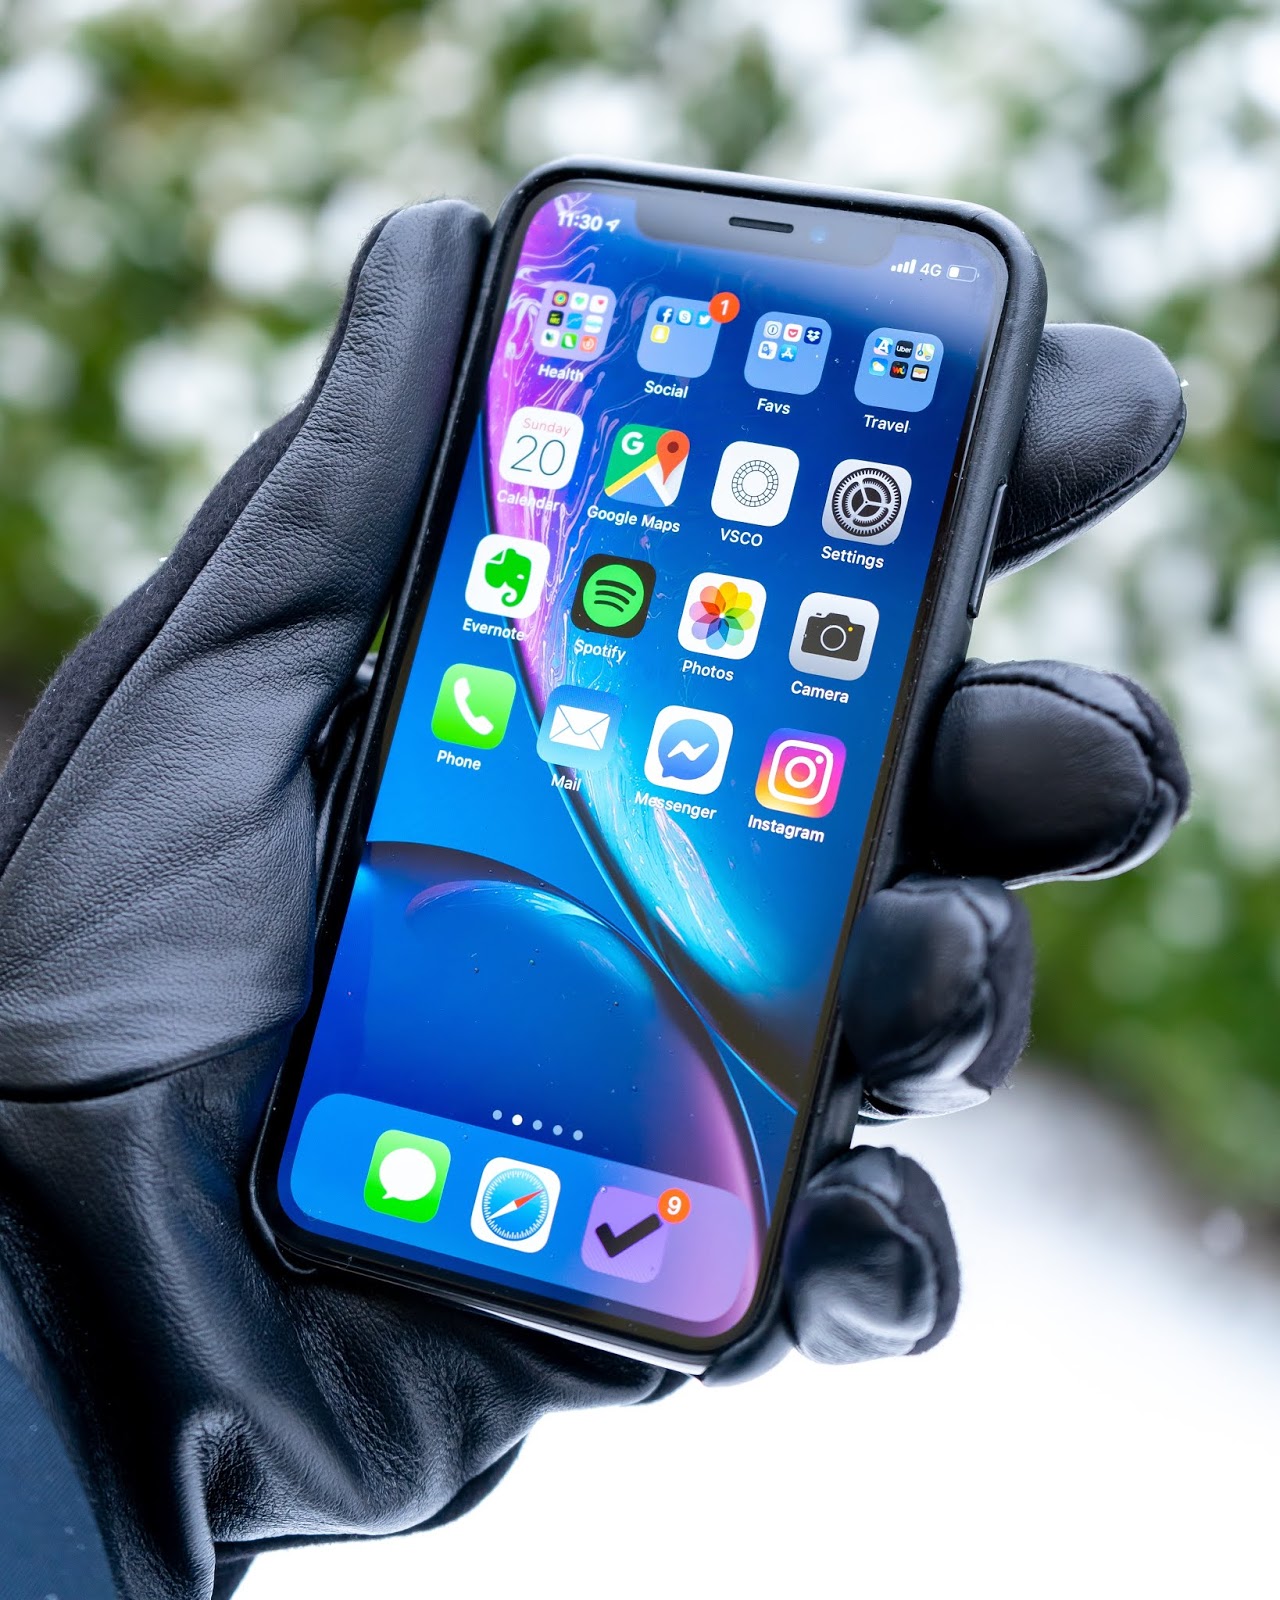 New Iphone 2019 Release Date Specs Rumours And More - iphone 12 release date in usa